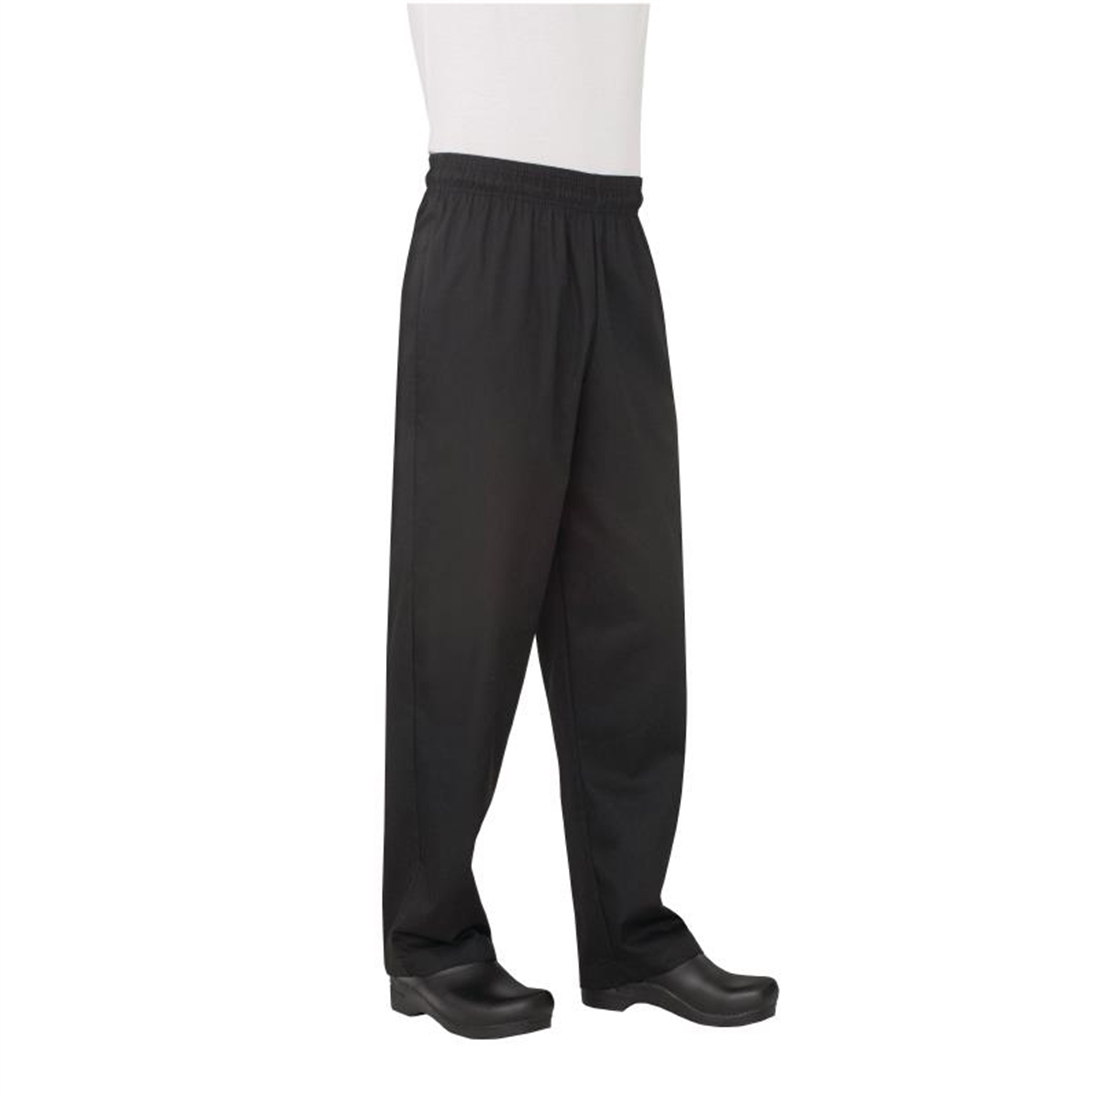 Chef Works Unisex Basic Baggy Chefs Trousers Black 6XL